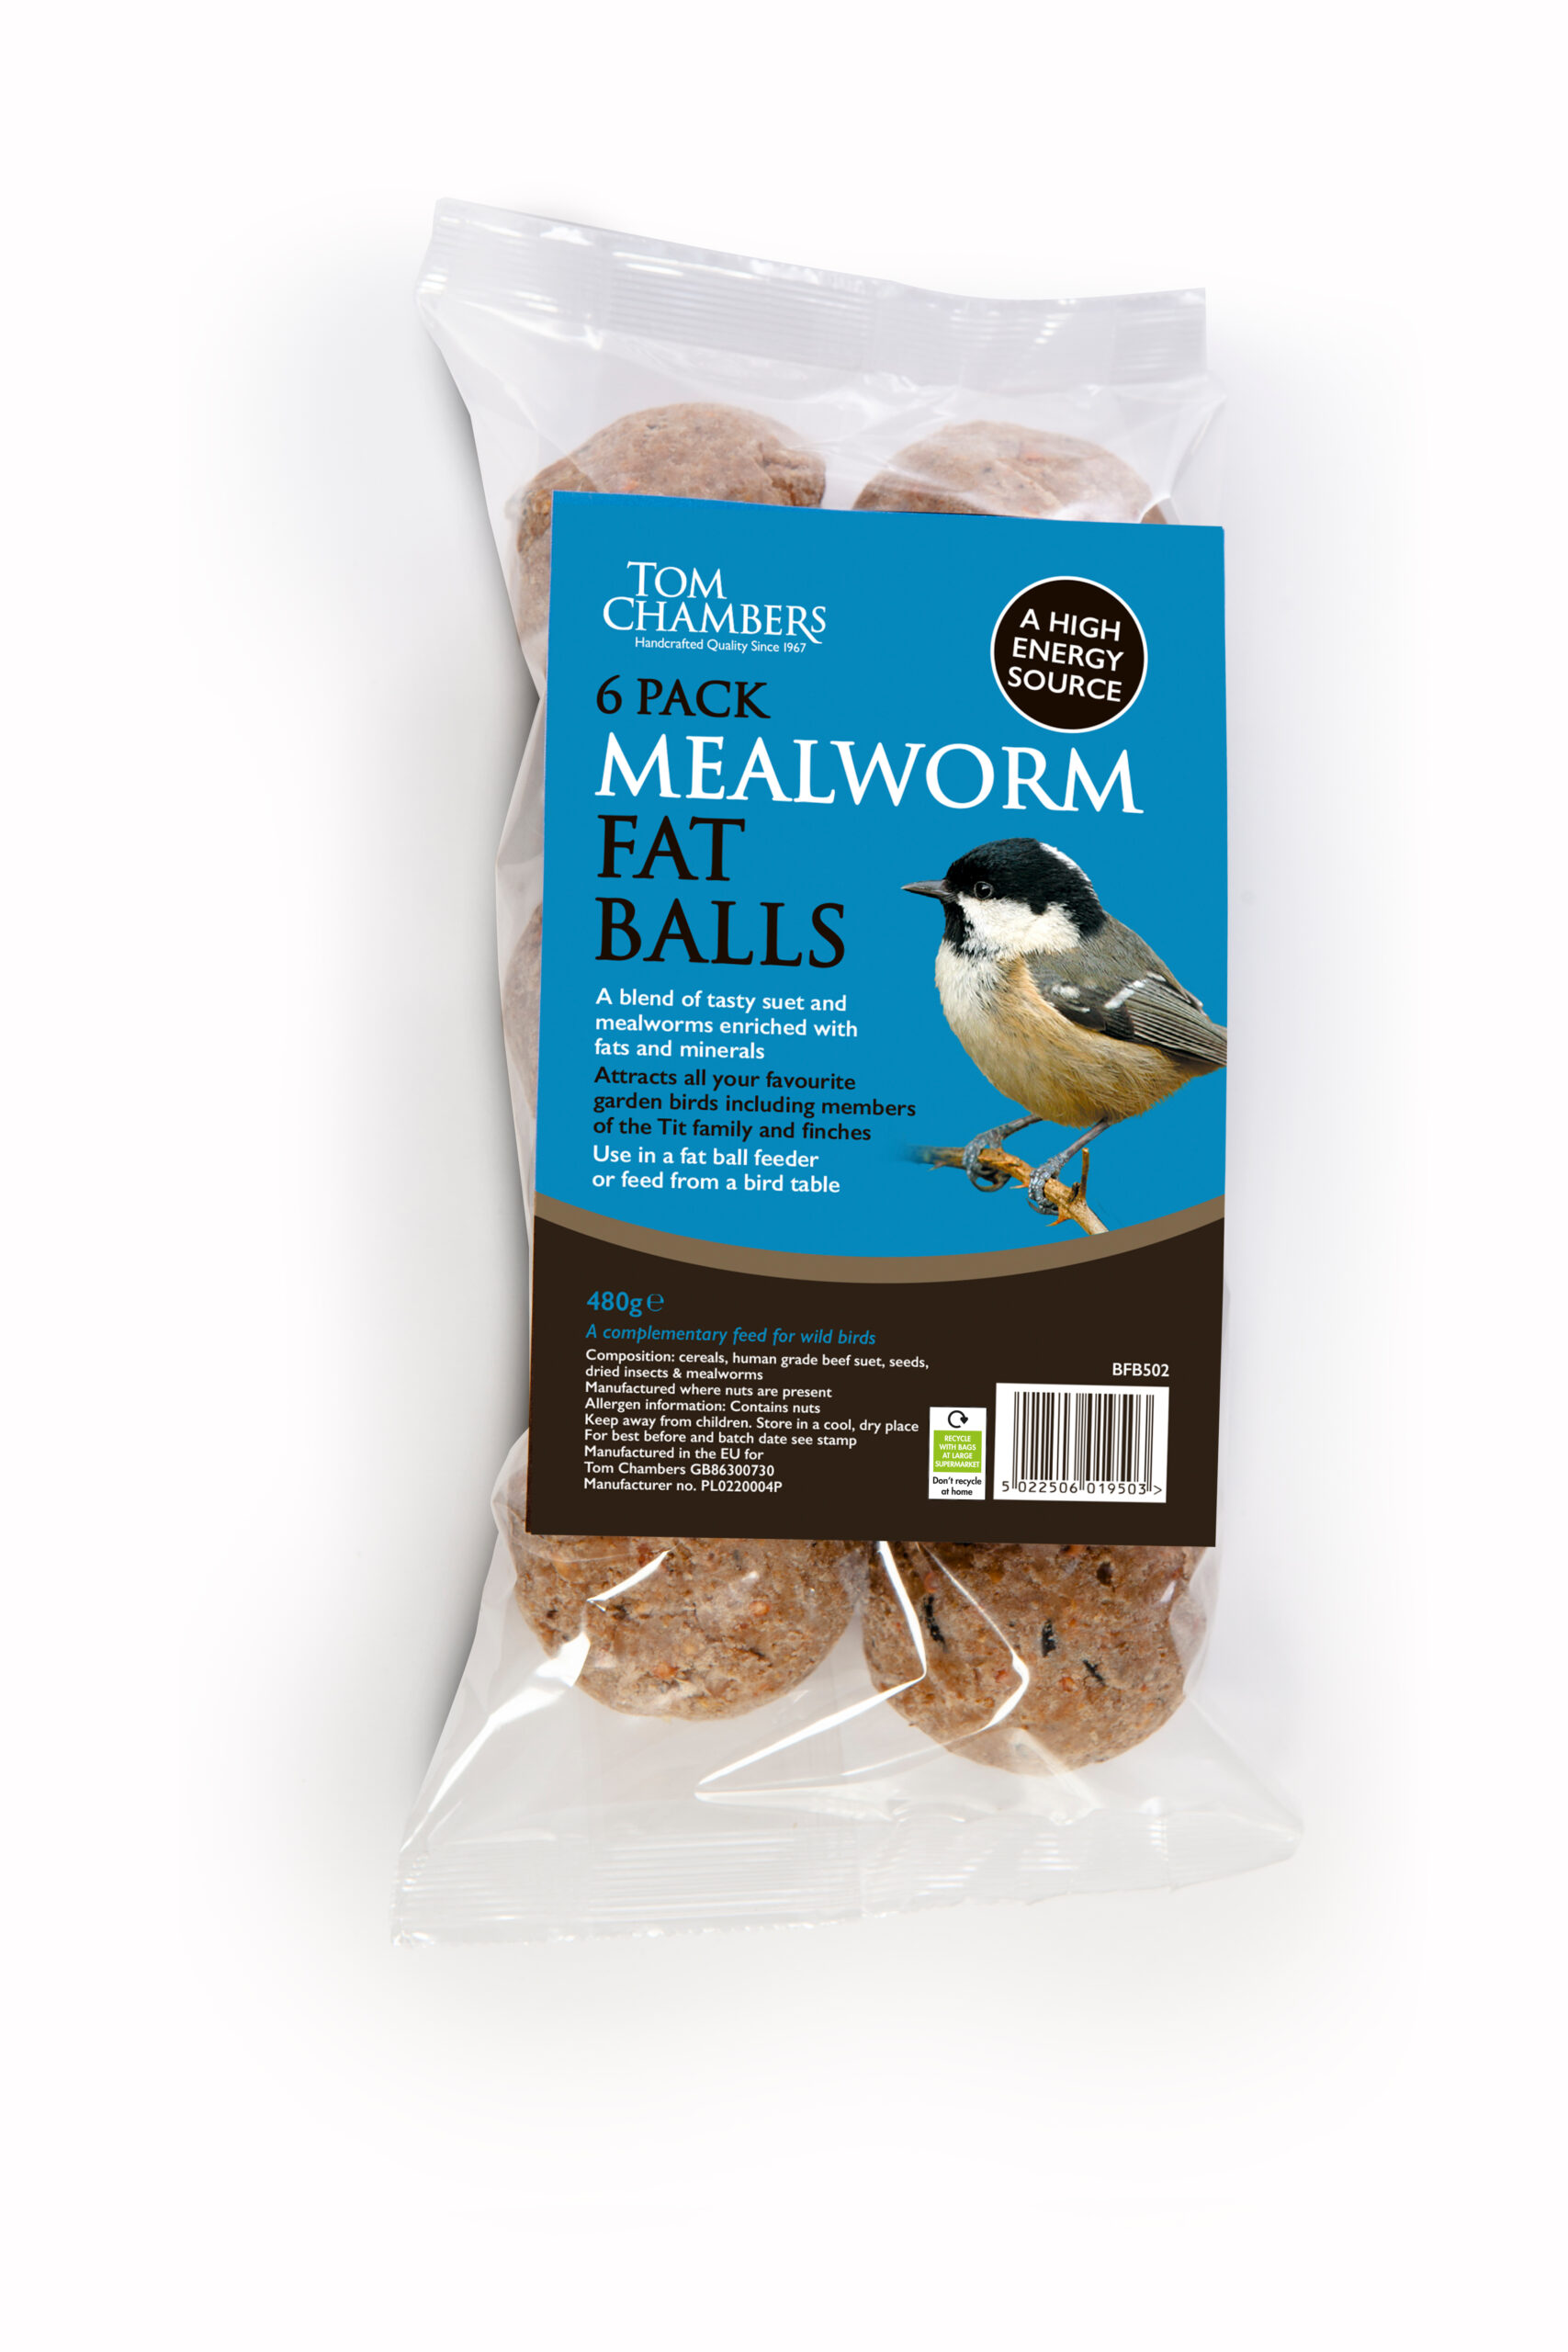 Tom chambers Fat Balls - 6 pack - Mealworm - No Nets